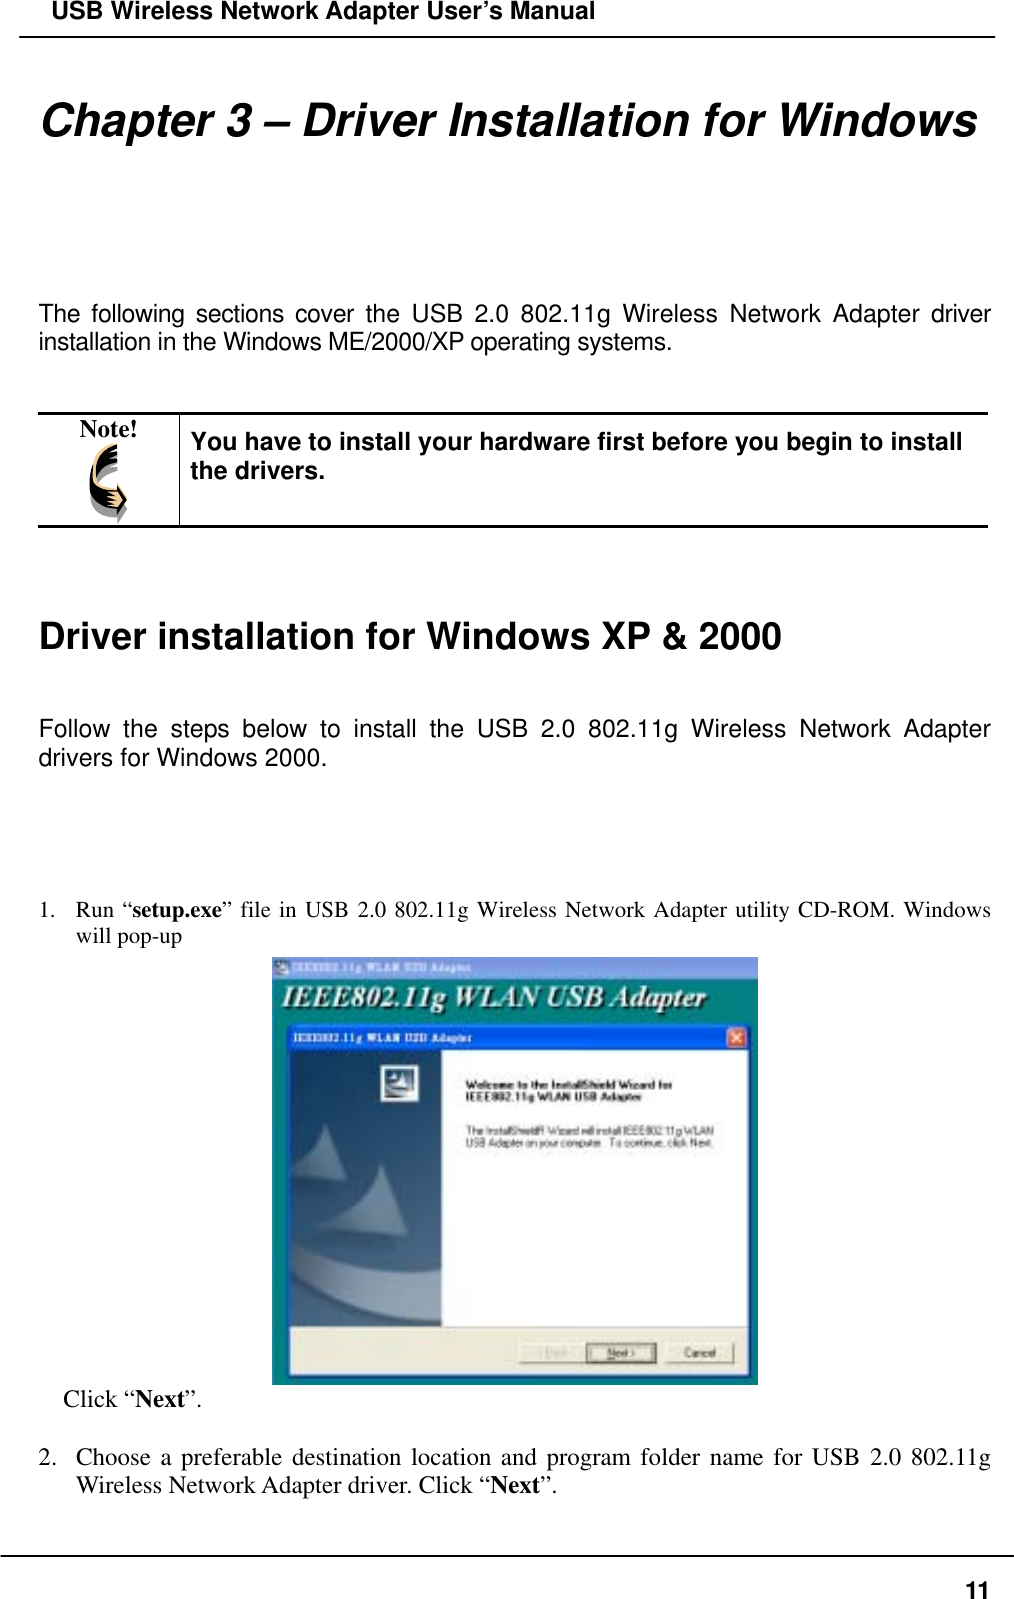   USB Wireless Network Adapter User’s Manual Chapter 3 – Driver Installation for Windows  The following sections cover the USB 2.0 802.11g Wireless Network Adapter driver installation in the Windows ME/2000/XP operating systems.   Note!  You have to install your hardware first before you begin to install the drivers.    Driver installation for Windows XP &amp; 2000   Follow the steps below to install the USB 2.0 802.11g Wireless Network Adapter drivers for Windows 2000.     1. Run “setup.exe” file in USB 2.0 802.11g Wireless Network Adapter utility CD-ROM. Windows will pop-up   Click “Next”.  2.  Choose a preferable destination location and program folder name for USB 2.0 802.11g Wireless Network Adapter driver. Click “Next”.  11